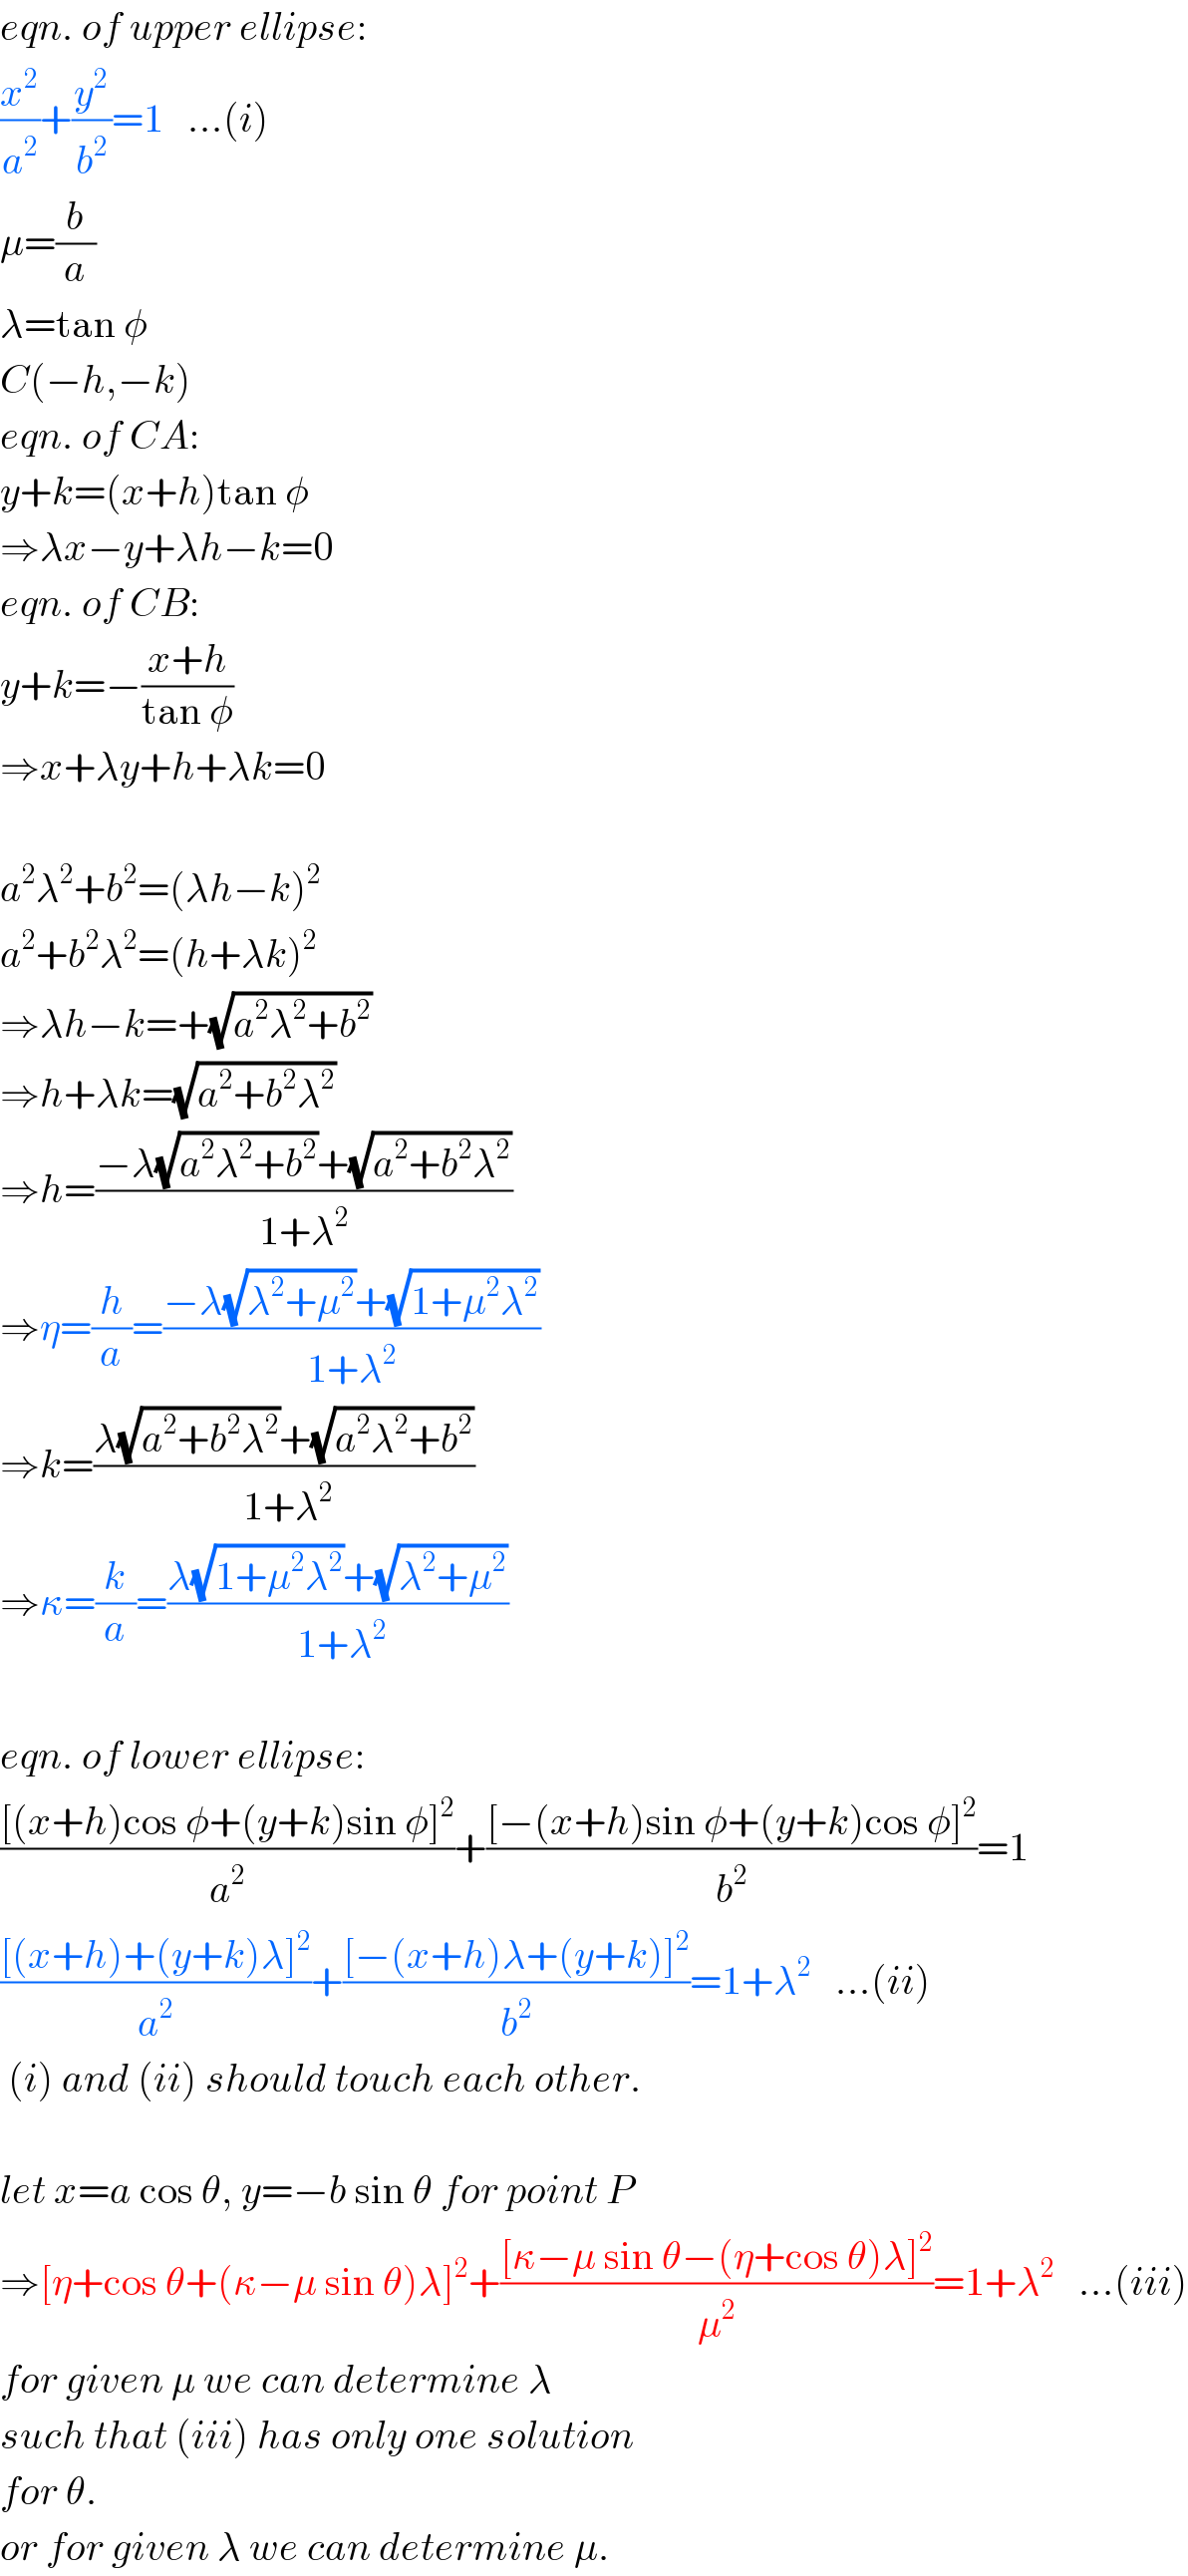 eqn. of upper ellipse:  (x^2 /a^2 )+(y^2 /b^2 )=1   ...(i)  μ=(b/a)  λ=tan φ  C(−h,−k)  eqn. of CA:  y+k=(x+h)tan φ  ⇒λx−y+λh−k=0  eqn. of CB:  y+k=−((x+h)/(tan φ))  ⇒x+λy+h+λk=0    a^2 λ^2 +b^2 =(λh−k)^2   a^2 +b^2 λ^2 =(h+λk)^2   ⇒λh−k=+(√(a^2 λ^2 +b^2 ))  ⇒h+λk=(√(a^2 +b^2 λ^2 ))  ⇒h=((−λ(√(a^2 λ^2 +b^2 ))+(√(a^2 +b^2 λ^2 )))/(1+λ^2 ))  ⇒η=(h/a)=((−λ(√(λ^2 +μ^2 ))+(√(1+μ^2 λ^2 )))/(1+λ^2 ))  ⇒k=((λ(√(a^2 +b^2 λ^2 ))+(√(a^2 λ^2 +b^2 )))/( 1+λ^2 ))  ⇒κ=(k/a)=((λ(√(1+μ^2 λ^2 ))+(√(λ^2 +μ^2 )))/( 1+λ^2 ))    eqn. of lower ellipse:  (([(x+h)cos φ+(y+k)sin φ]^2 )/a^2 )+(([−(x+h)sin φ+(y+k)cos φ]^2 )/b^2 )=1  (([(x+h)+(y+k)λ]^2 )/a^2 )+(([−(x+h)λ+(y+k)]^2 )/b^2 )=1+λ^2    ...(ii)   (i) and (ii) should touch each other.    let x=a cos θ, y=−b sin θ for point P  ⇒[η+cos θ+(κ−μ sin θ)λ]^2 +(([κ−μ sin θ−(η+cos θ)λ]^2 )/μ^2 )=1+λ^2    ...(iii)  for given μ we can determine λ  such that (iii) has only one solution  for θ.  or for given λ we can determine μ.  